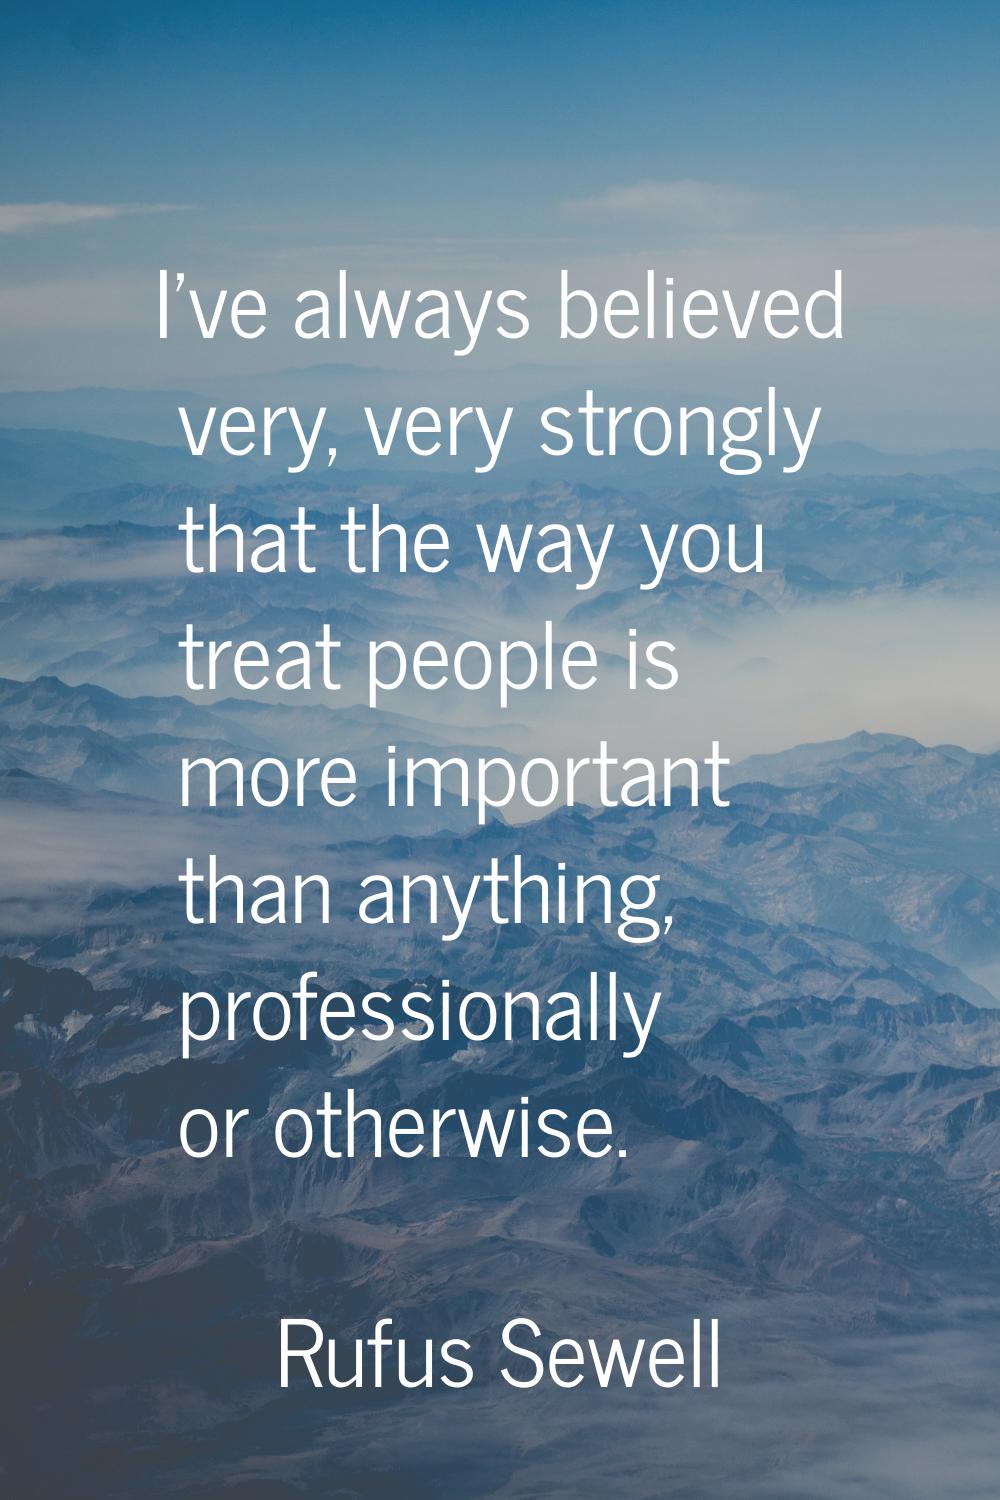 I've always believed very, very strongly that the way you treat people is more important than anyth